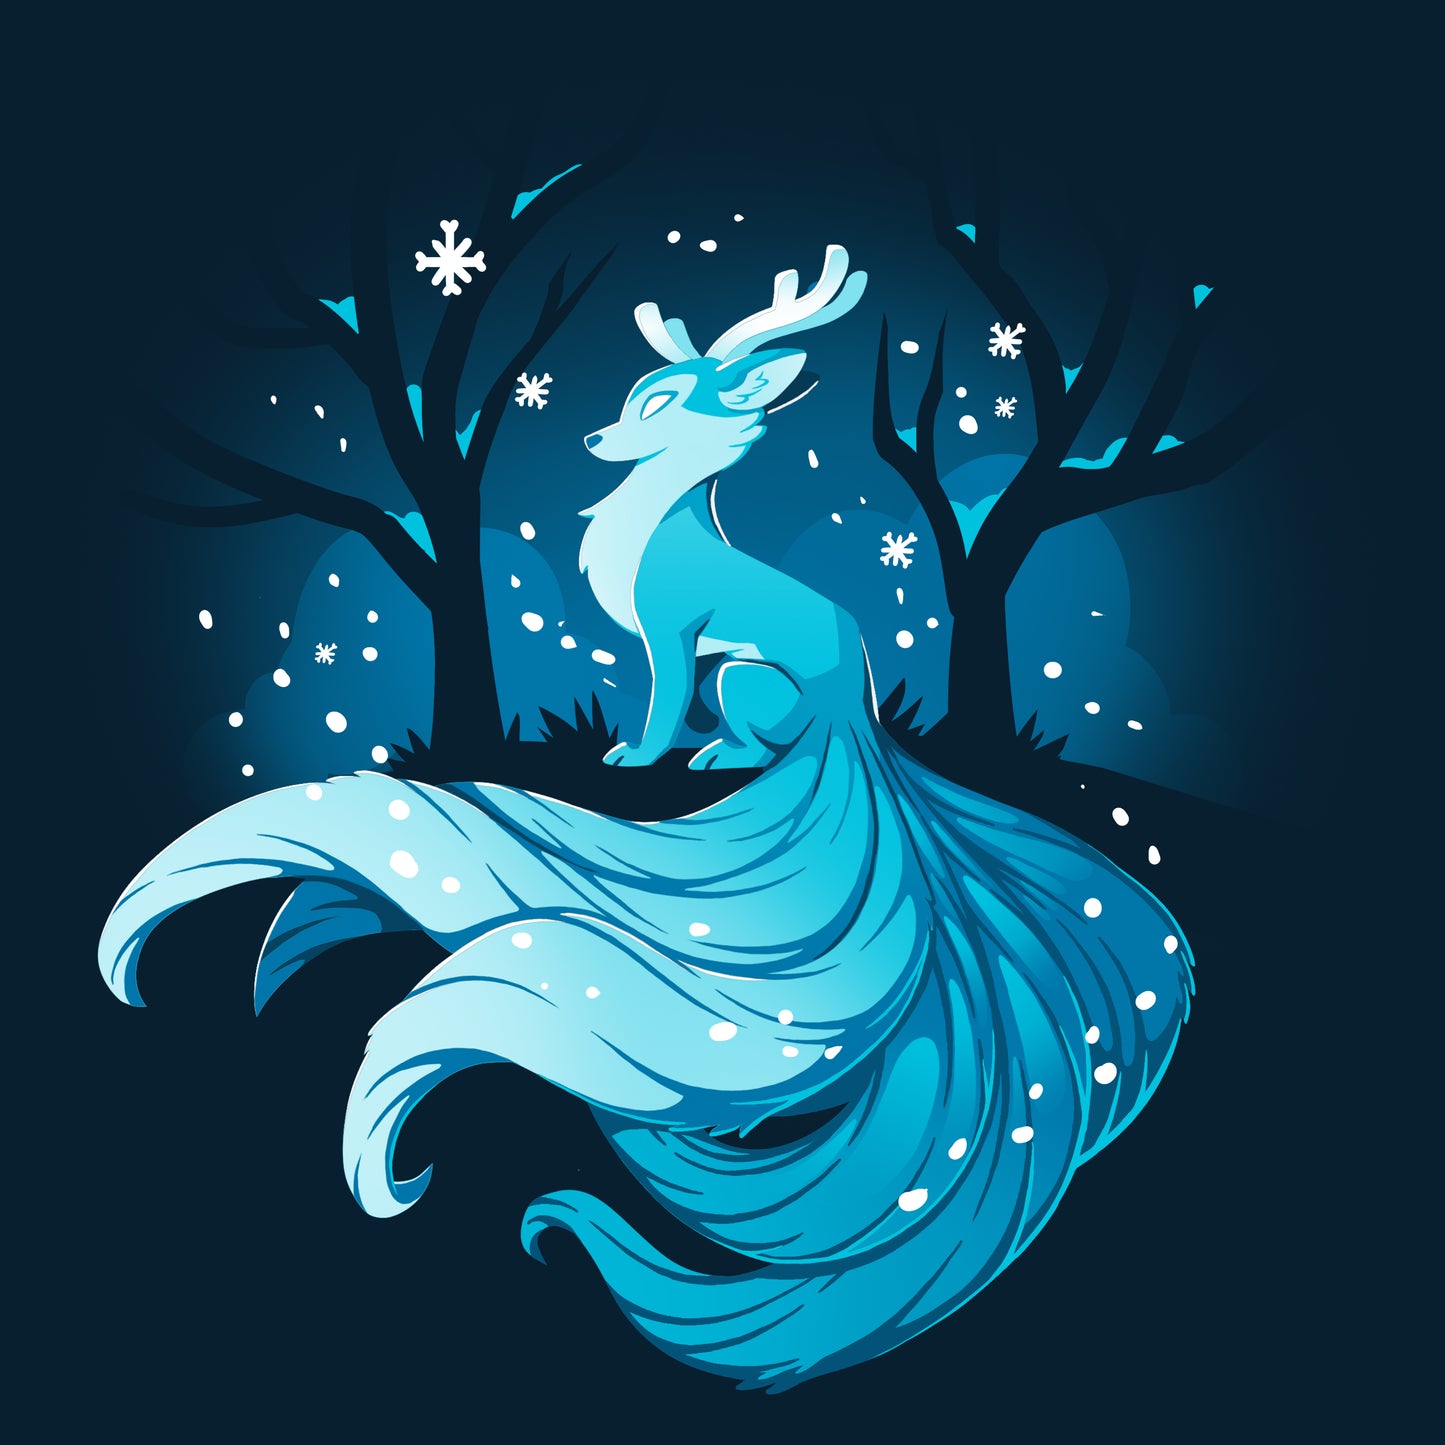 A Winter Kitsune illustration of a blue Kitsune in the forest by TeeTurtle.